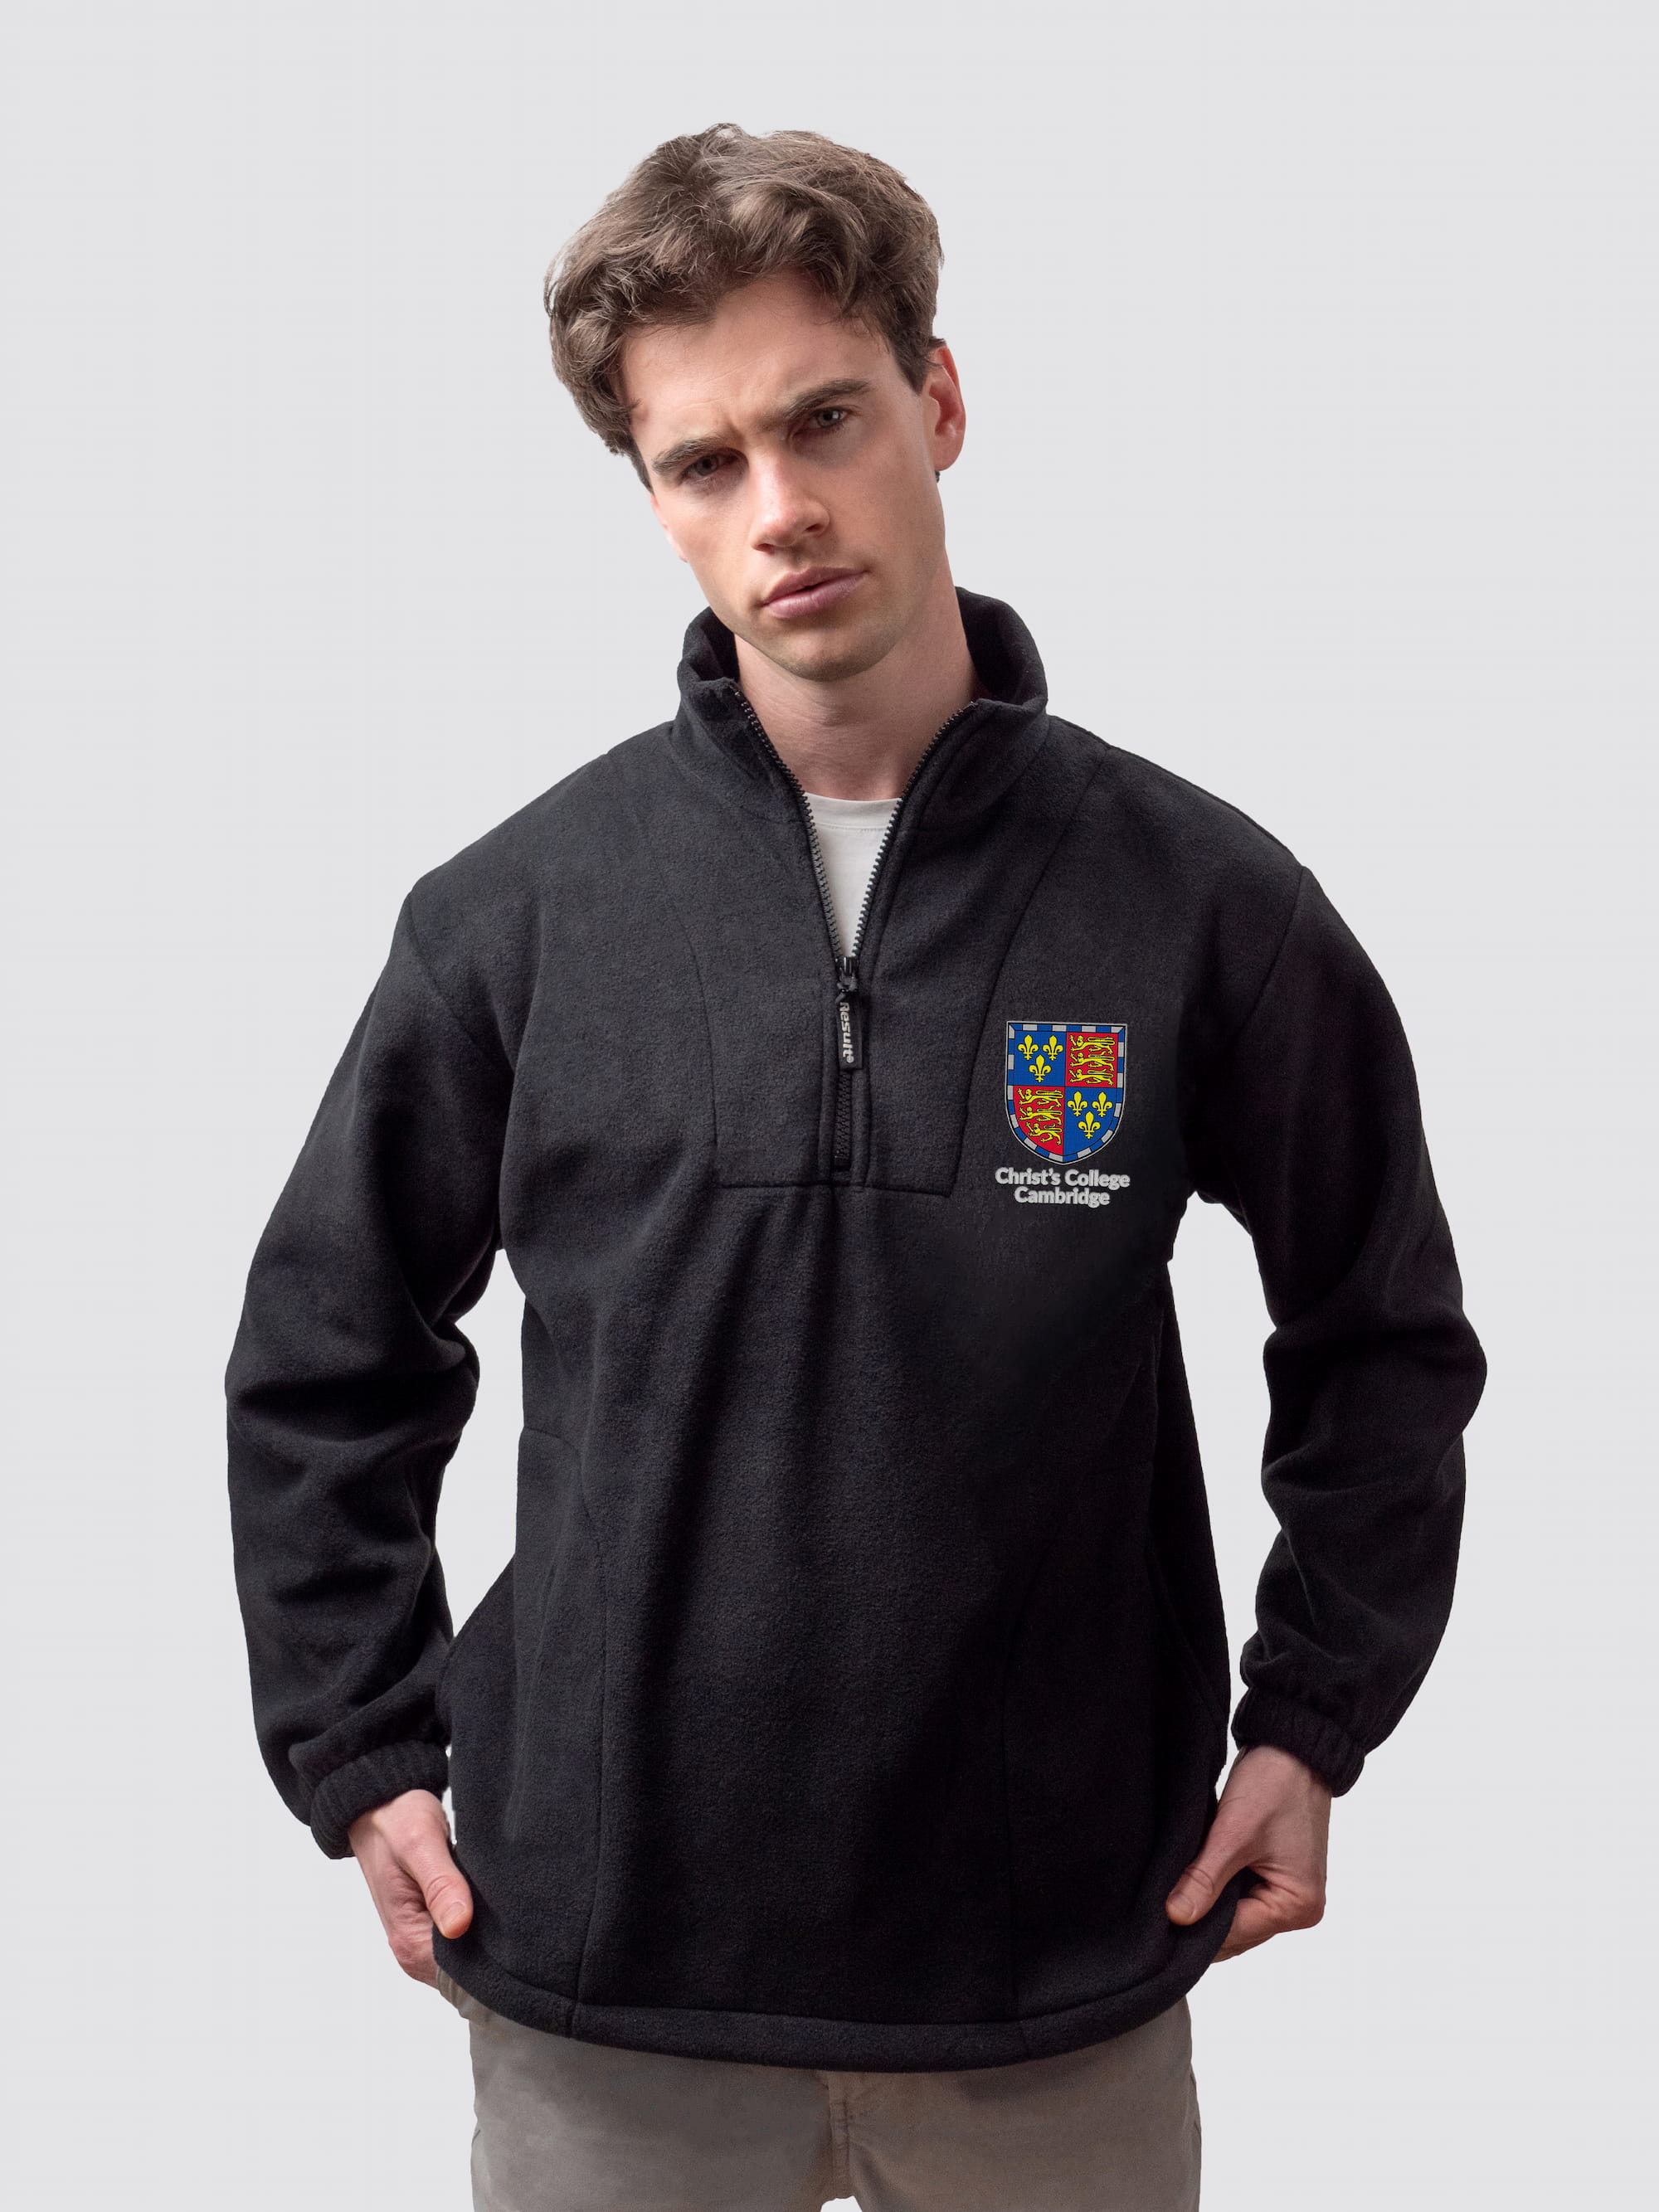 Cambridge university fleece, with custom embroidered initials and Christ's crest